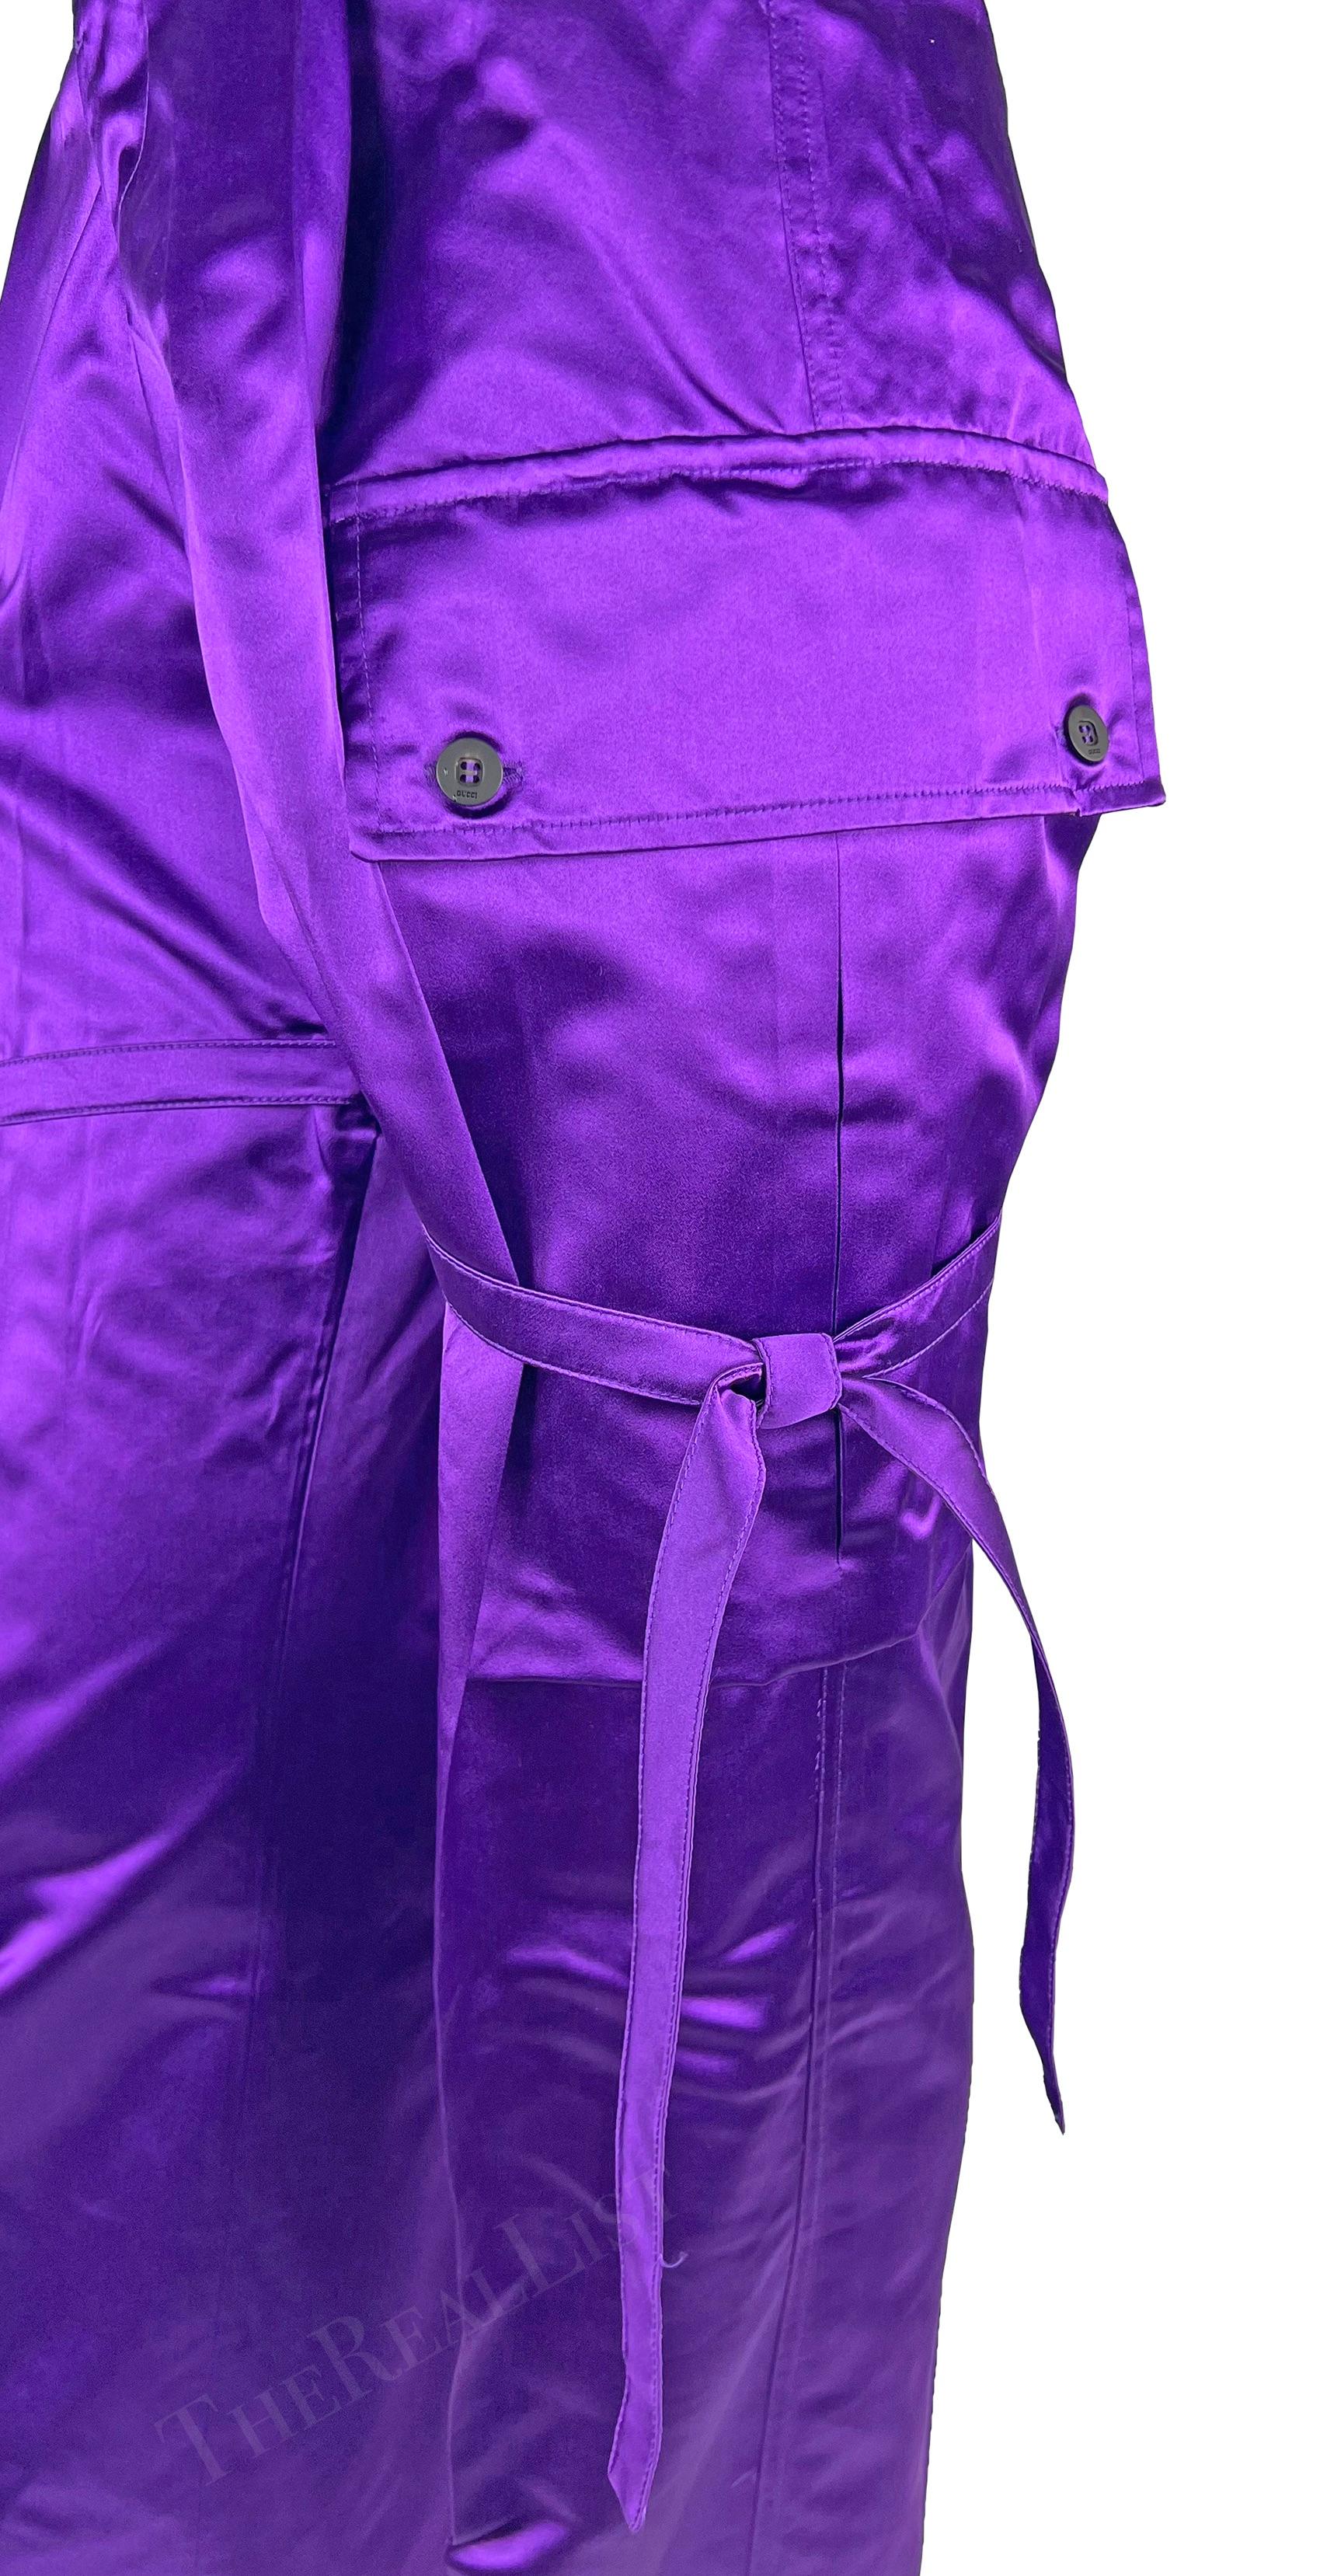 Women's NWT S/S 2001 Gucci by Tom Ford Runway Purple Satin Tie Wide Leg Cargo Pants  For Sale